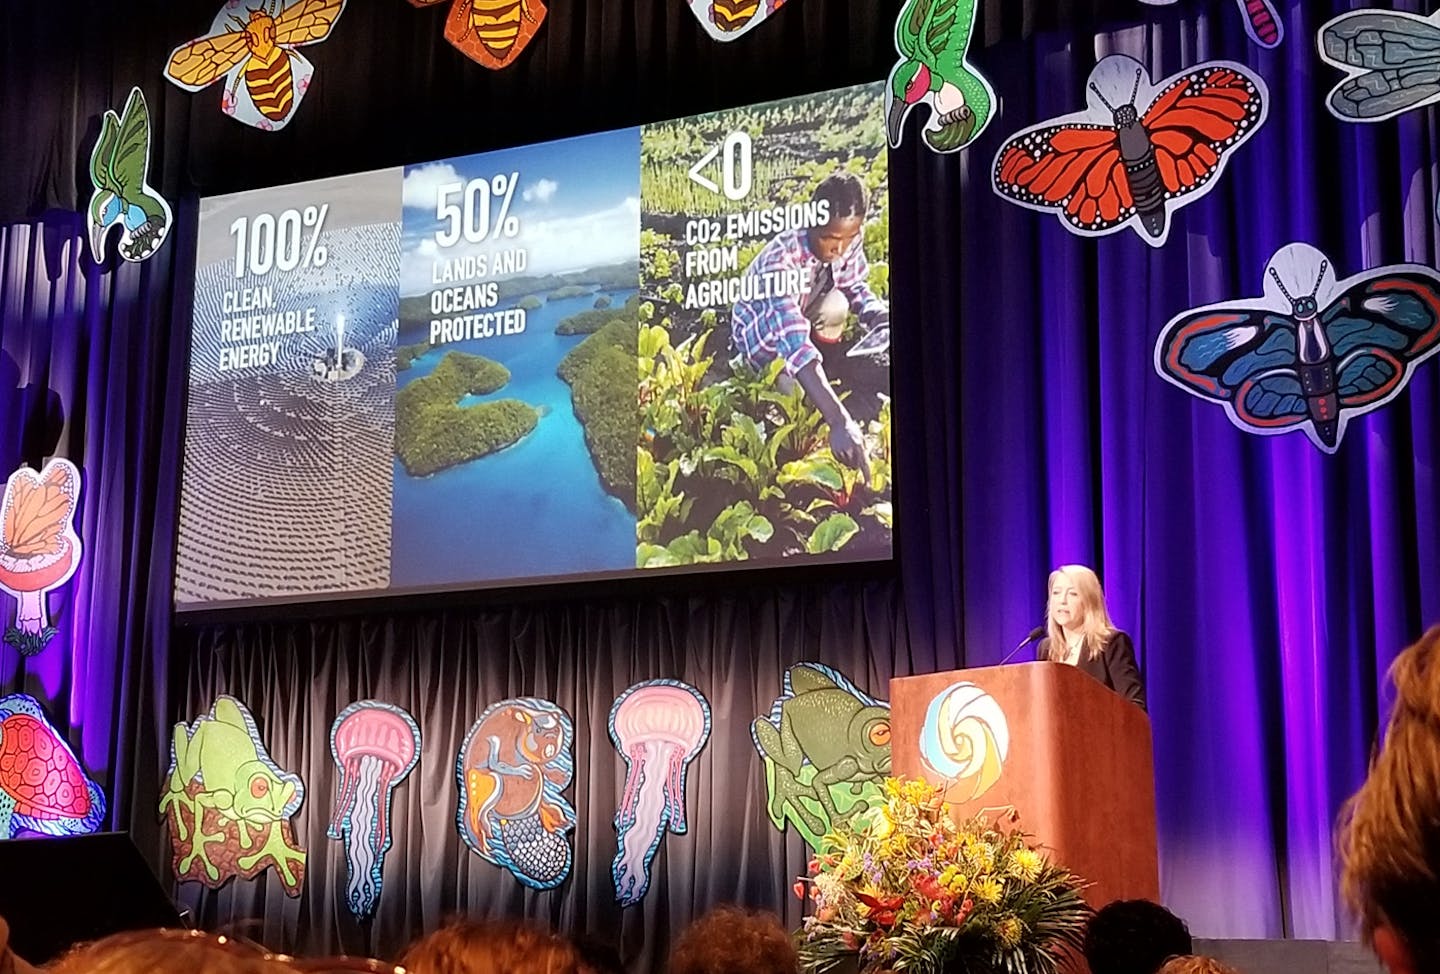 Presenting a vision of One Earth at Bioneers